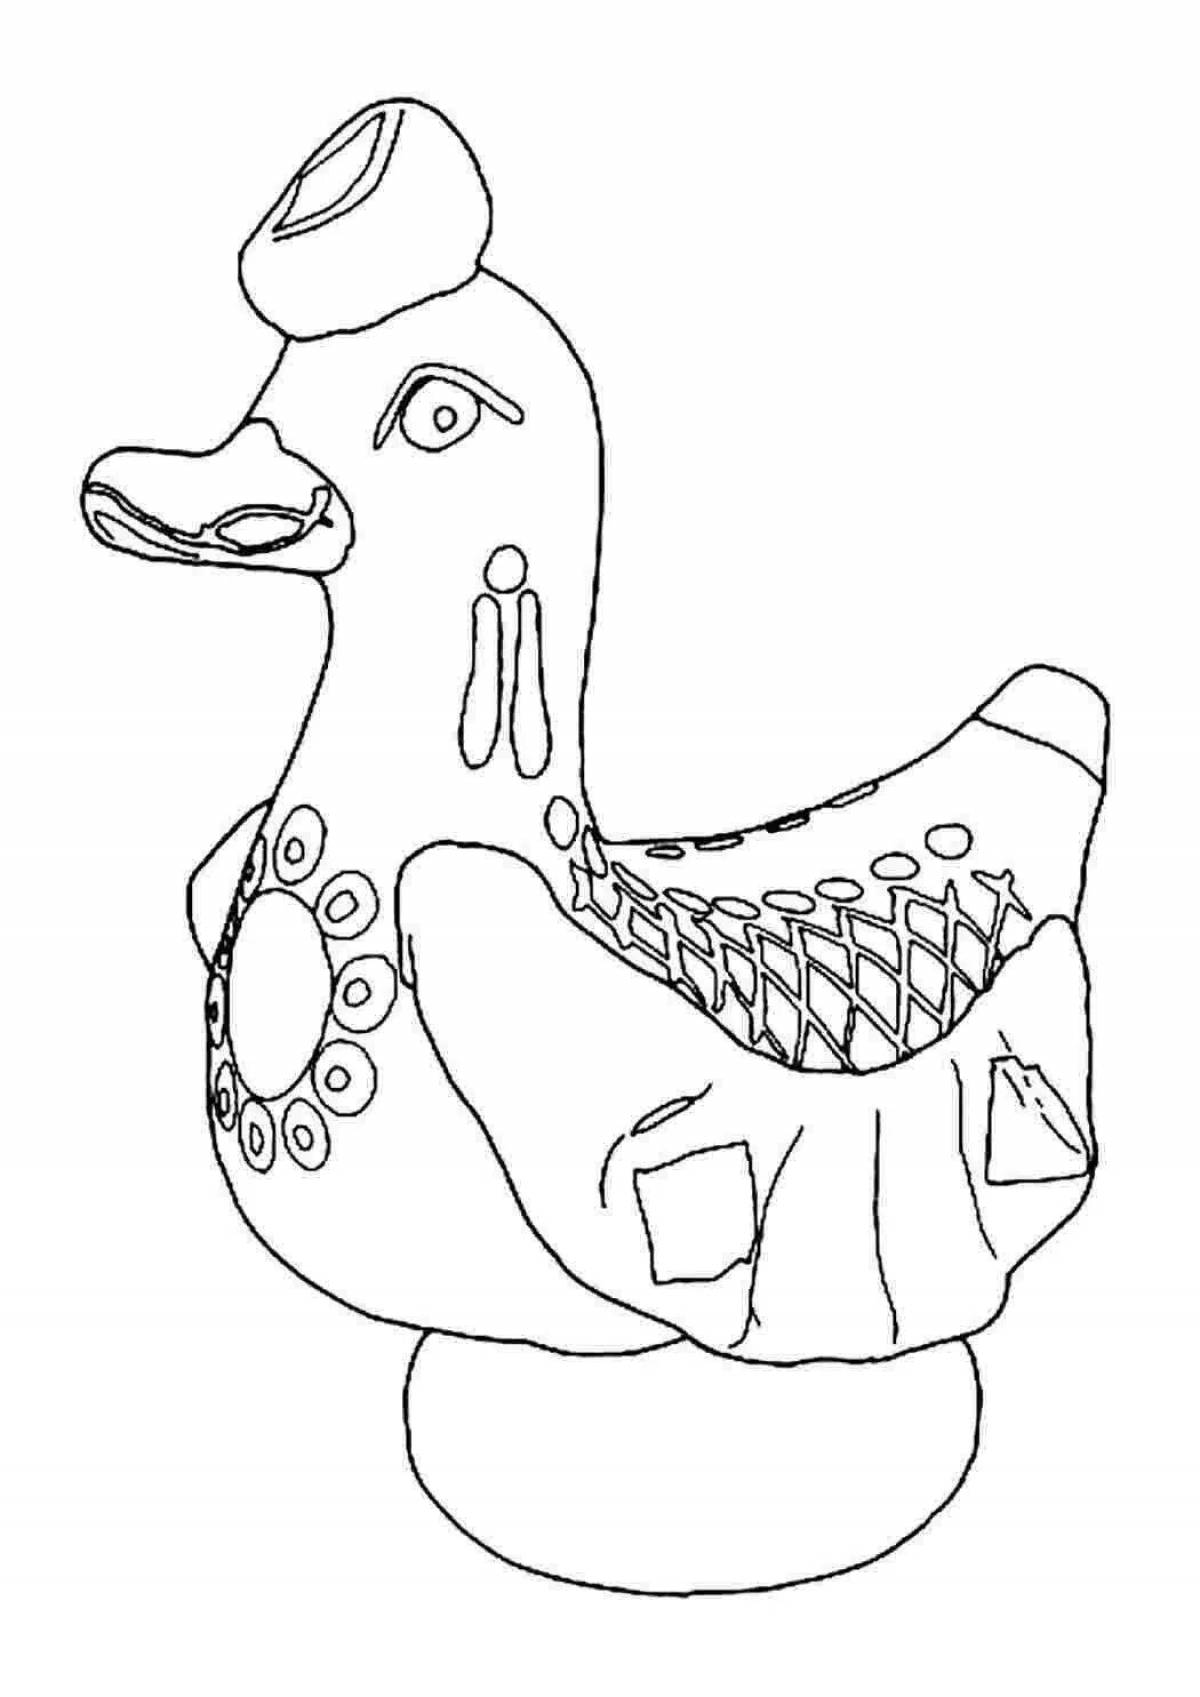 Flashing Smoky Duck coloring page